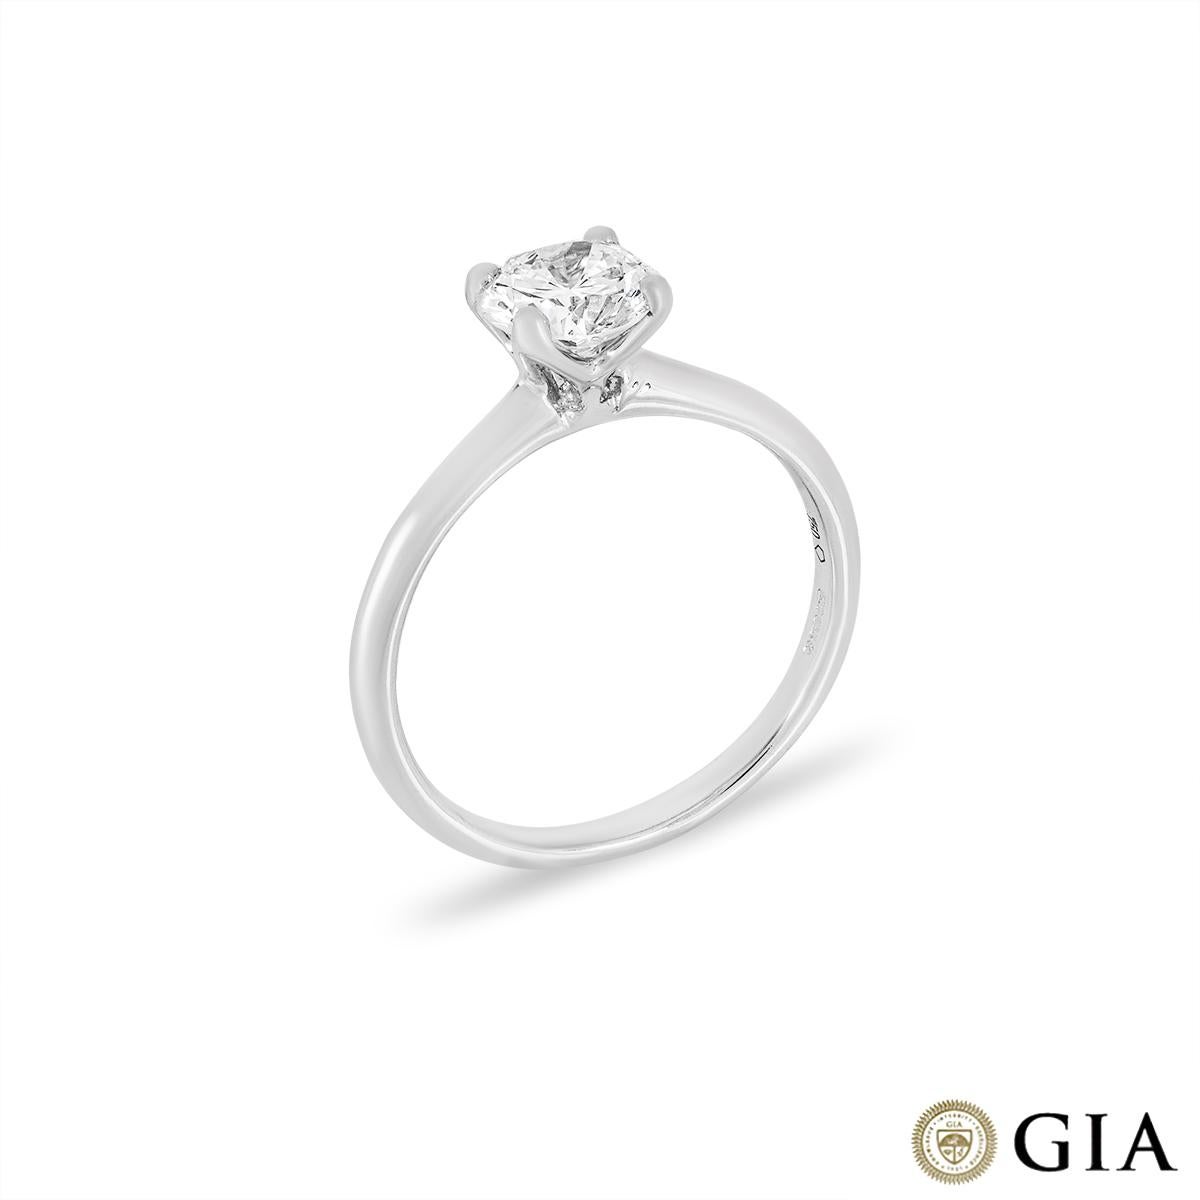 A lovely 18k white gold diamond engagement ring. The solitaire features a round brilliant cut diamond set in a four prong mount with a weight of 1.10ct, G colour and SI1 clarity. The diamond is showcased on a 2.17mm wide knife edge band with a gross